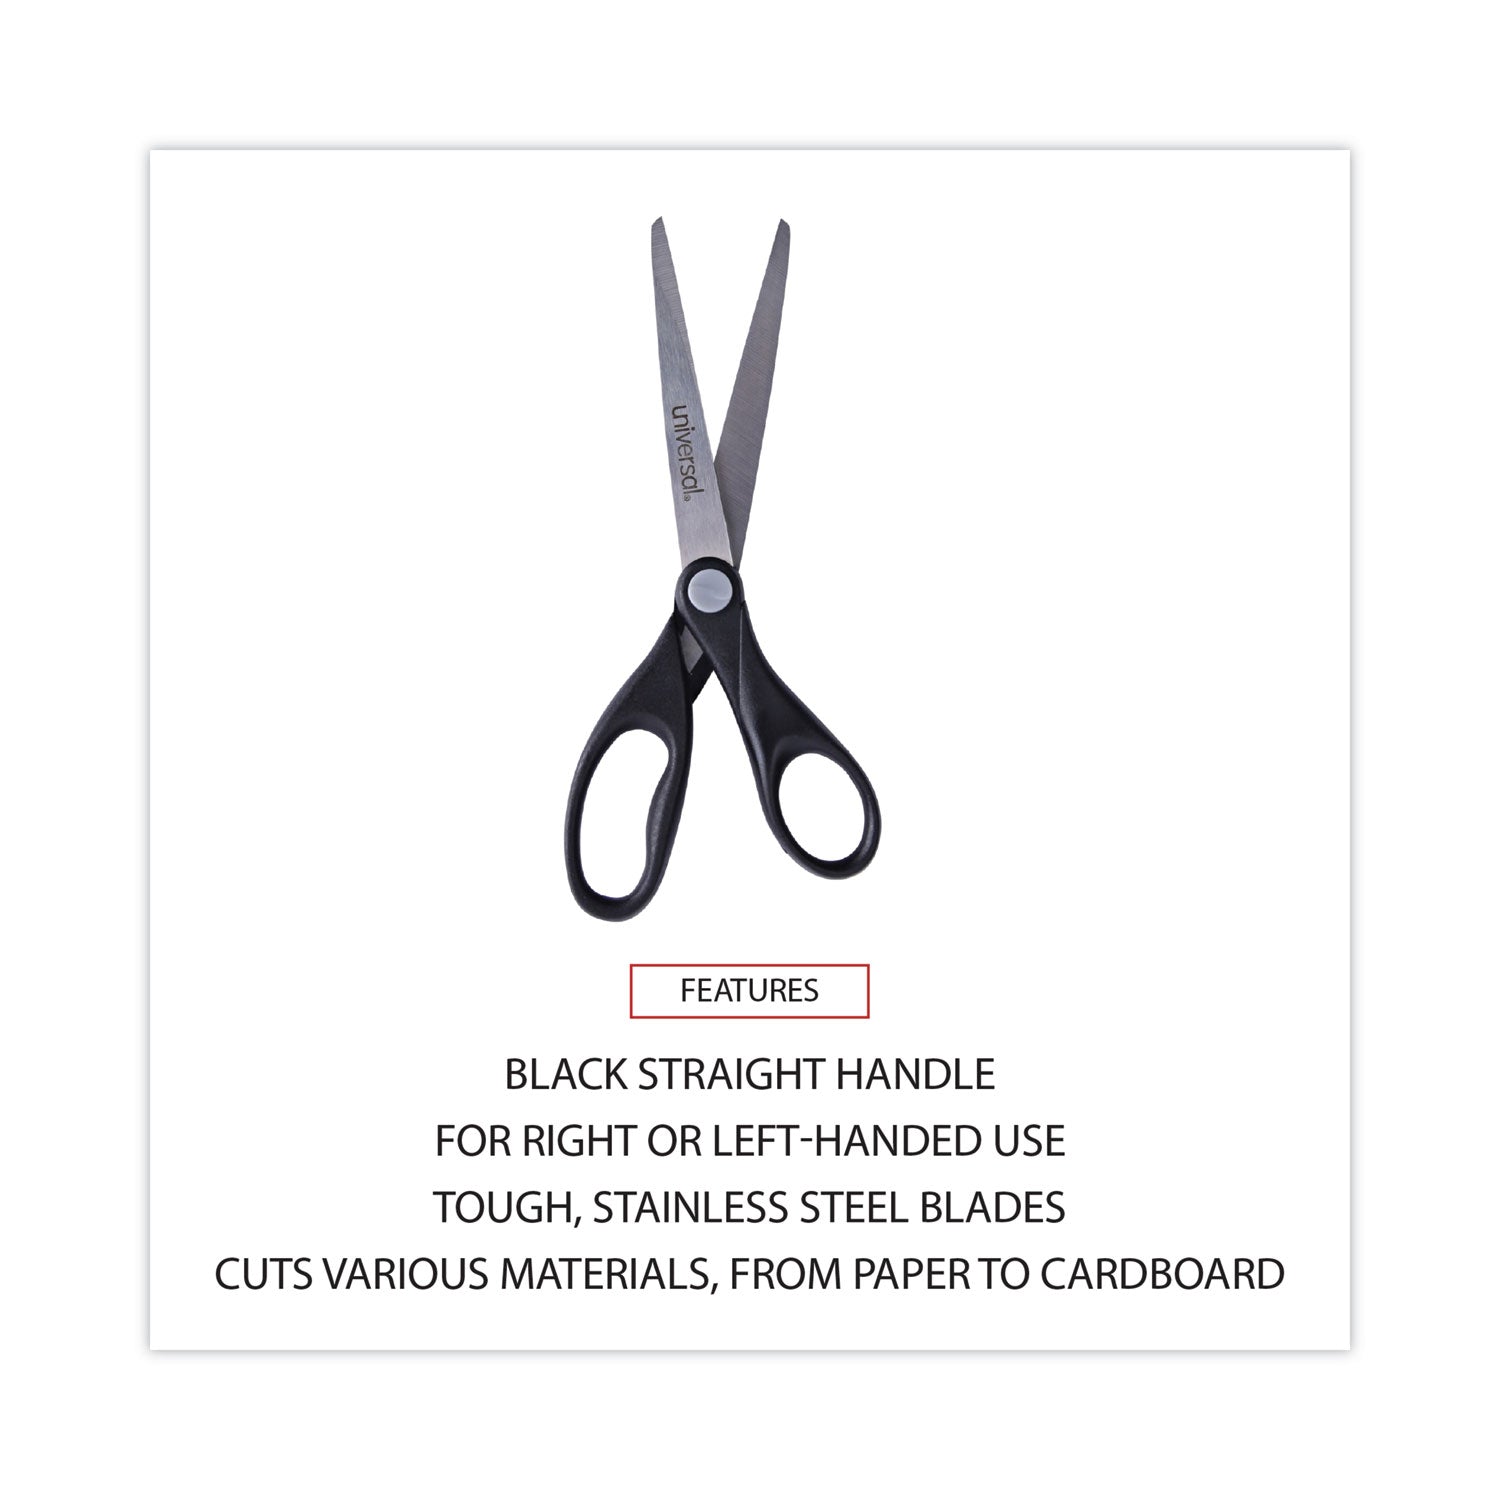 Stainless Steel Office Scissors, Pointed Tip, 7" Long, 3" Cut Length, Black Straight Handle - 